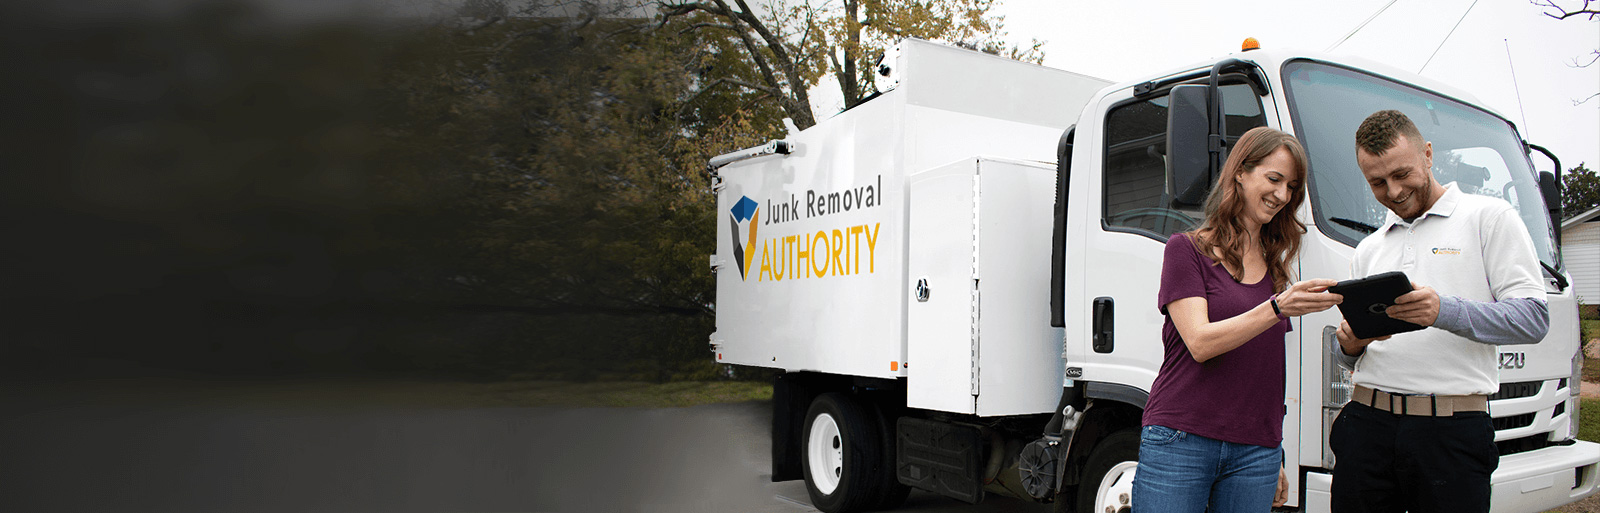 Junk Removal Authority